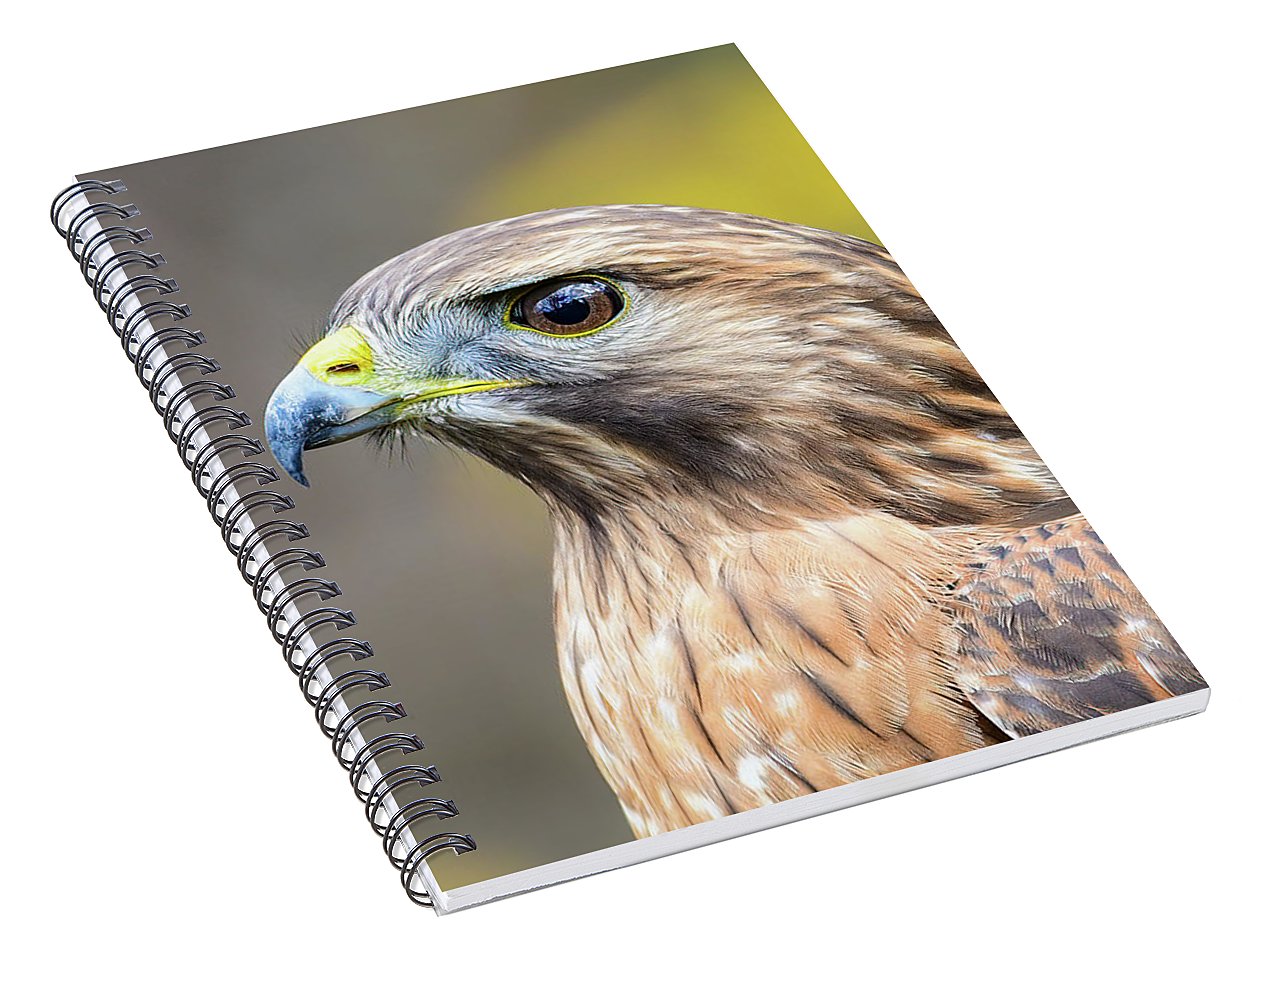 resting, nature, coopers hawk, hawk, raptor, feathers, branch, birds, birding, notebook, stationery, writing pad, spiral notebook, journal, photography, photograph